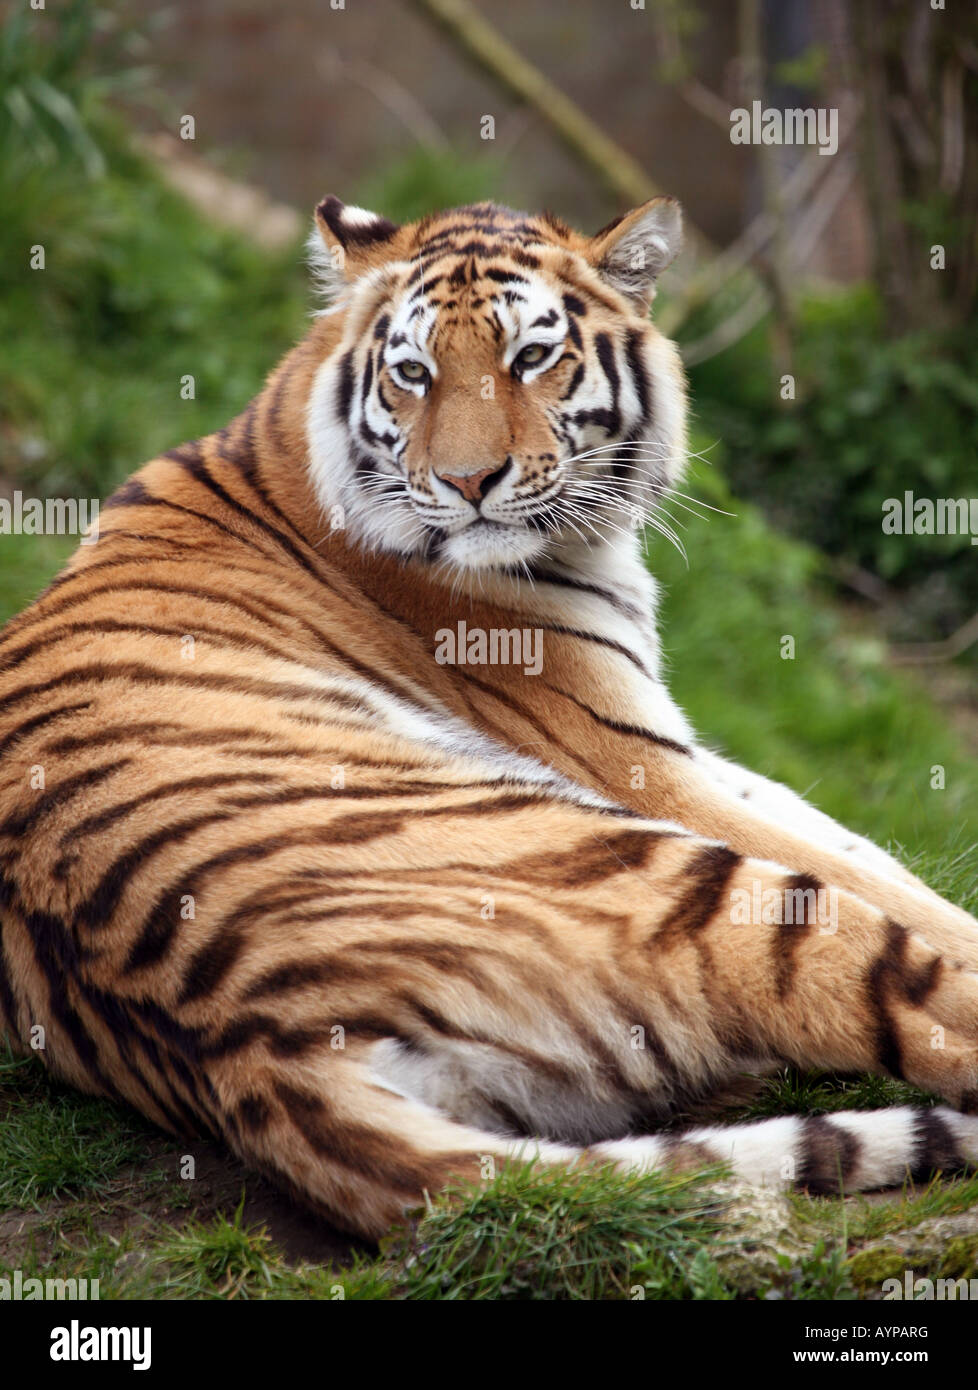 A  tiger relaxing Stock Photo